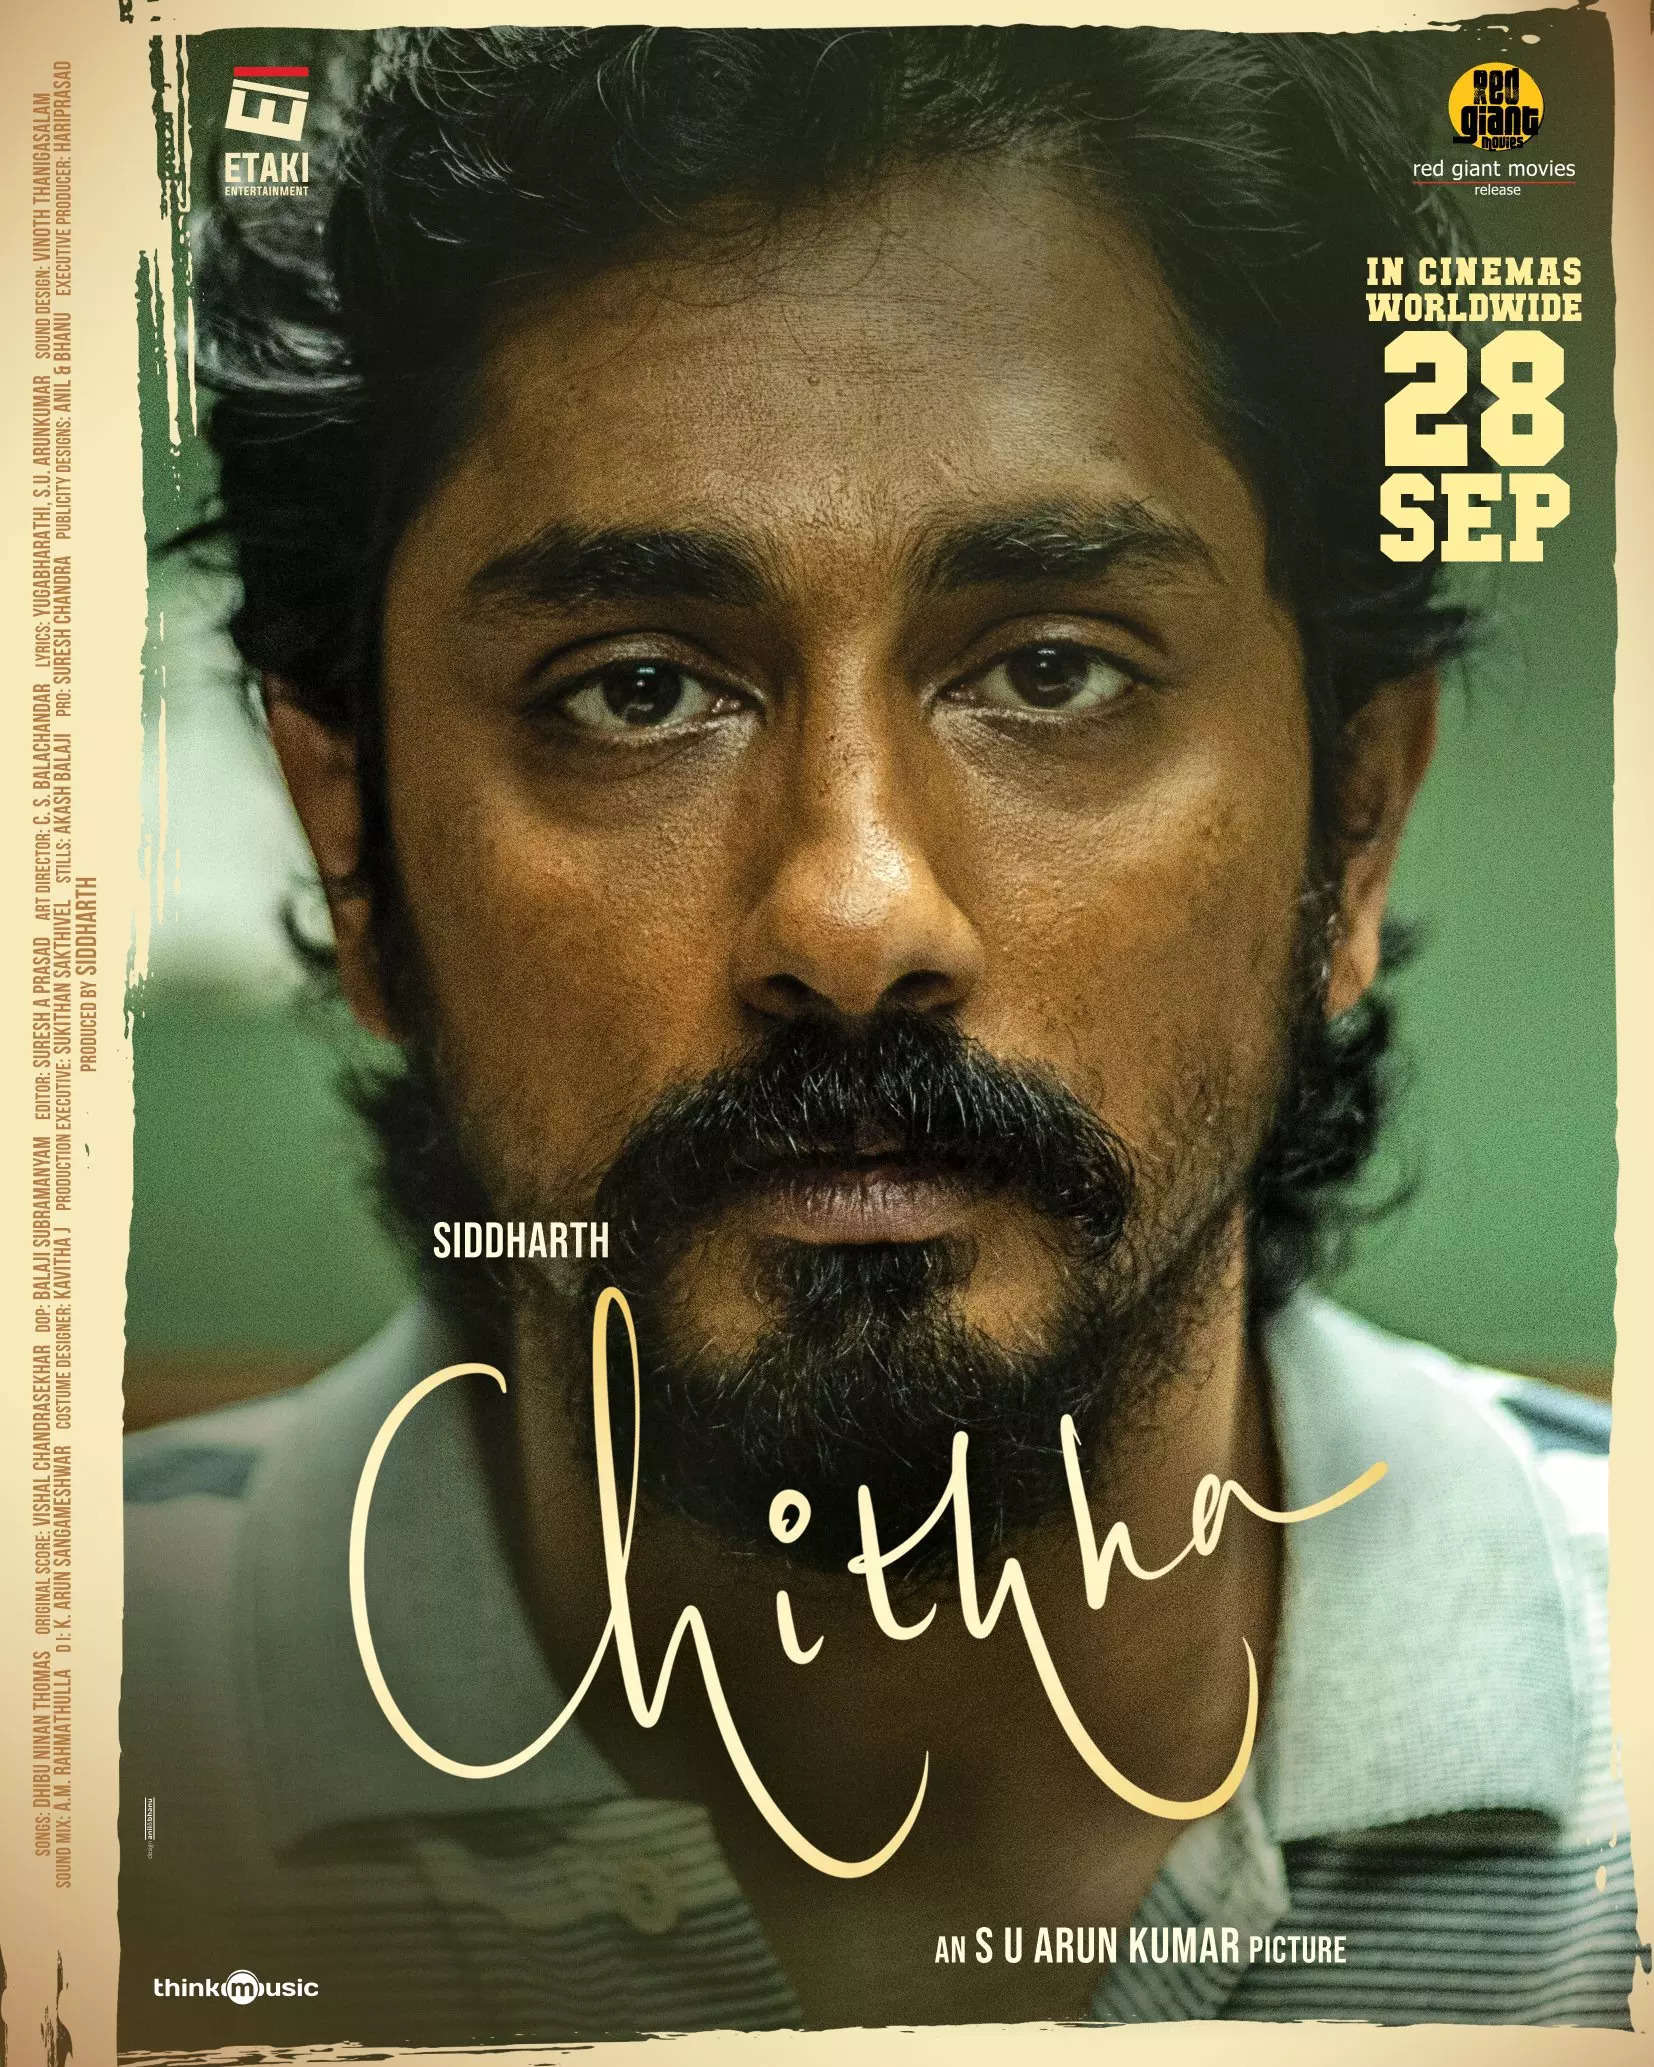 Chithha Movie Review: Siddharth’s Chithha is a hard-hitting and deeply unsettling tale of abuse